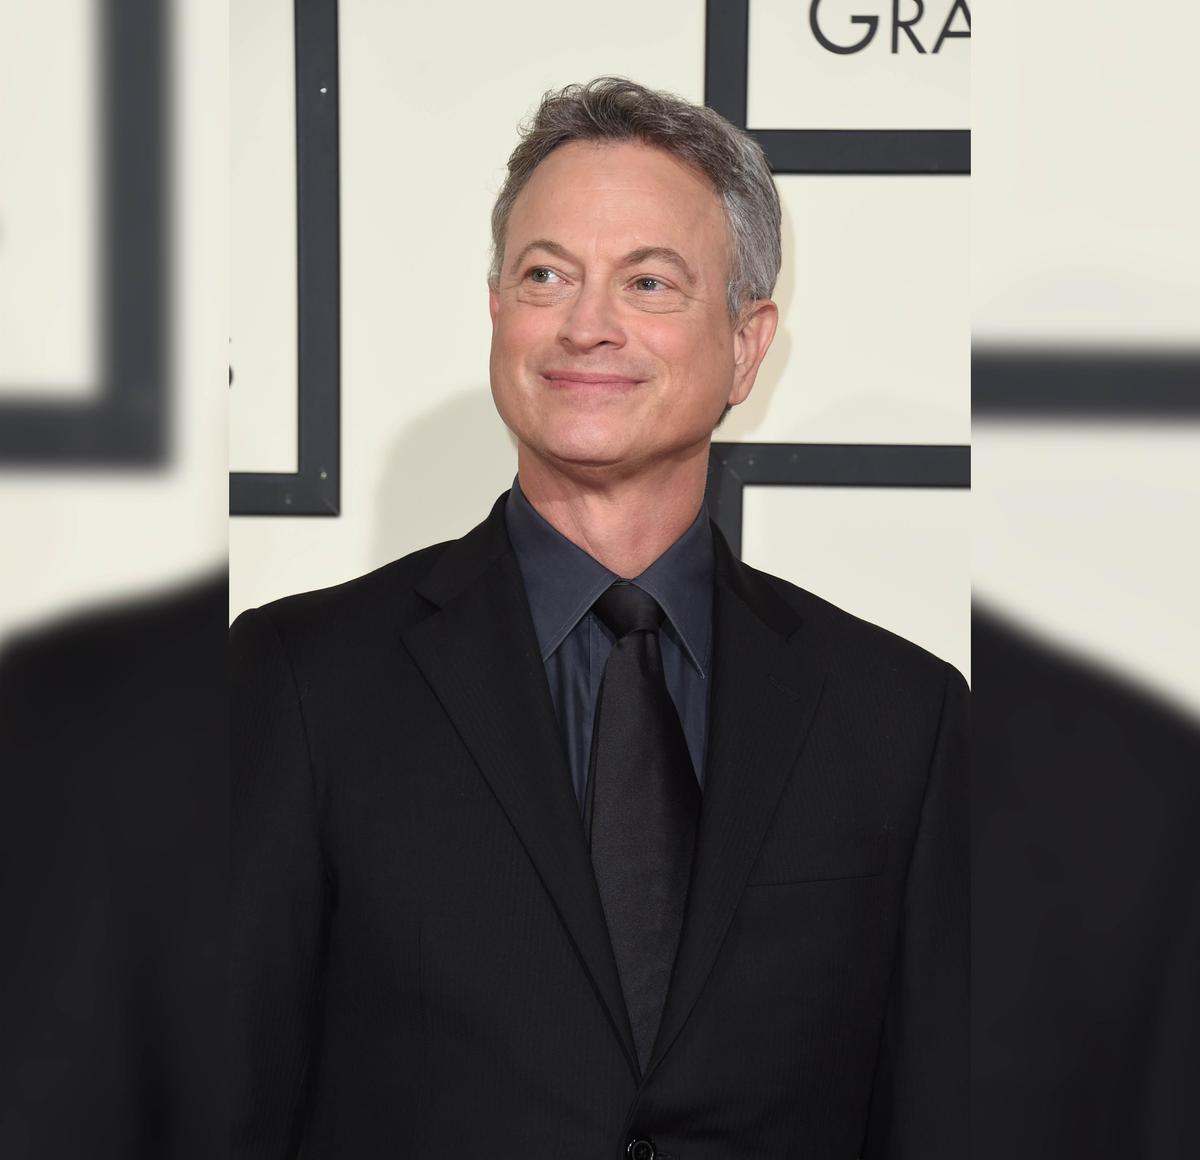 Actor Gary Sinise arrives on the red carpet during the 58th Annual Grammy Music Awards in Los Angeles Feb. 15, 2016. (VALERIE MACON/AFP via Getty Images)